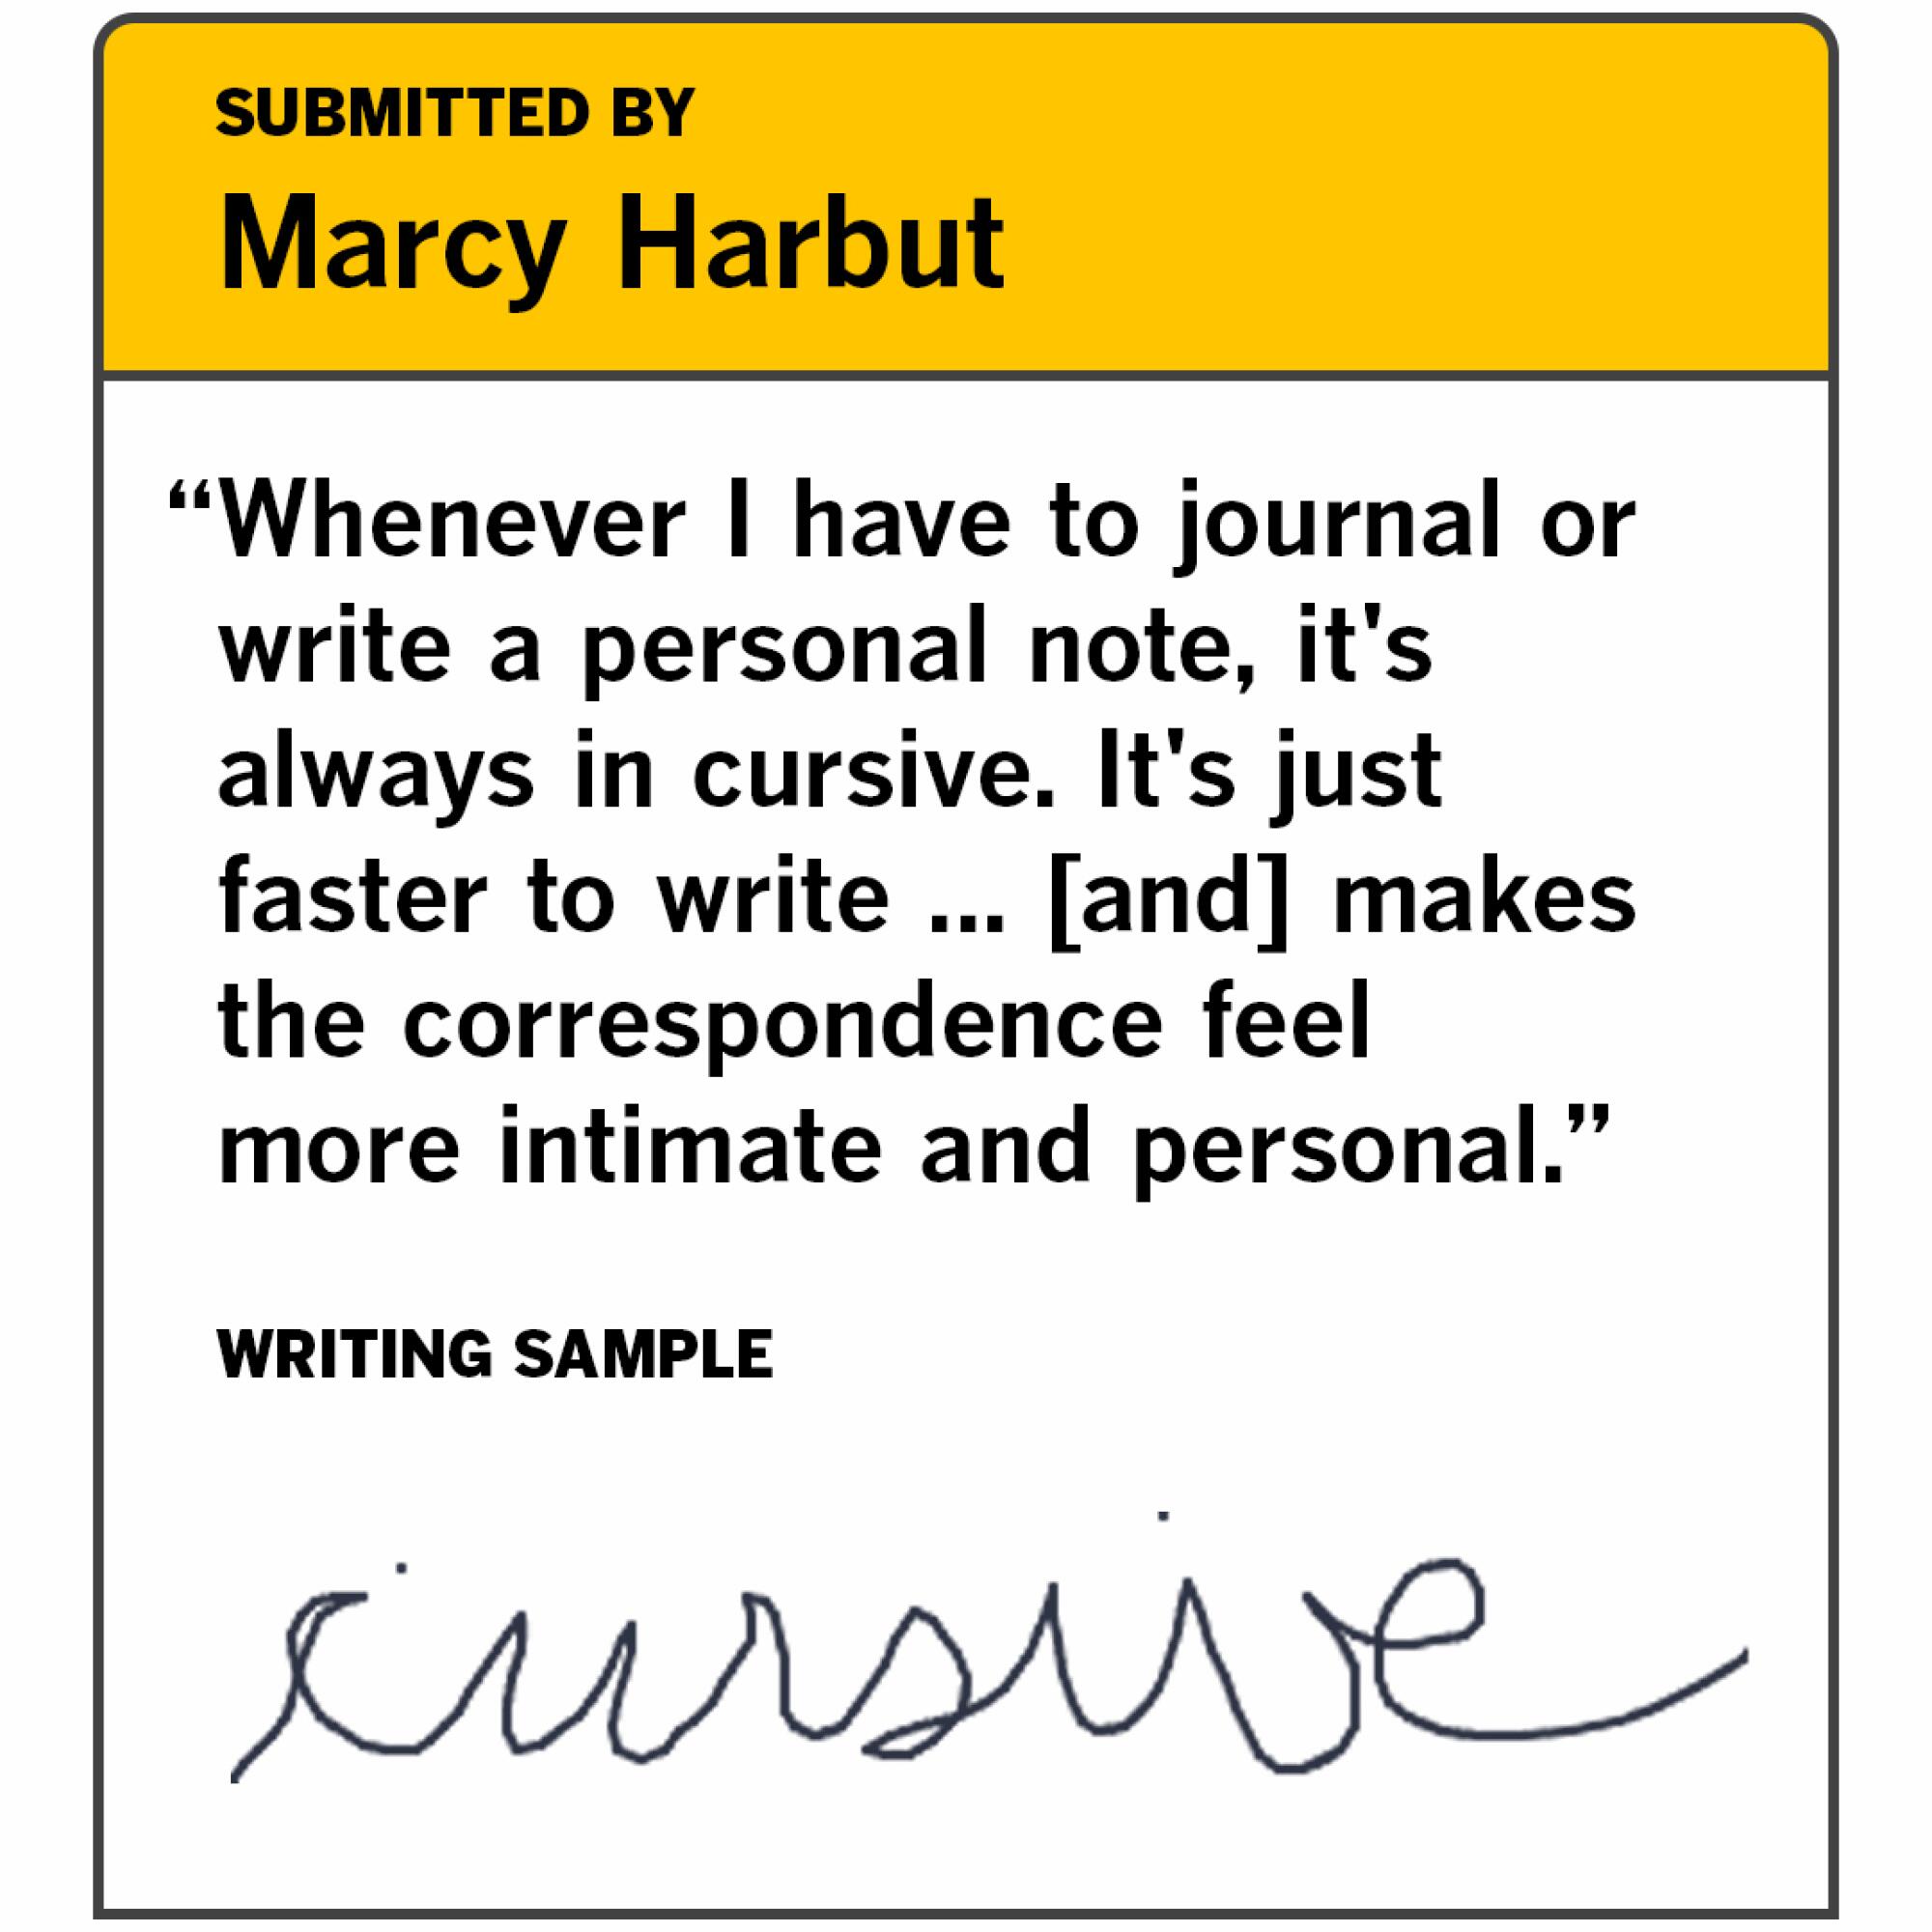 Cursive example from Marcy Harbut. "It's just faster to write and makes the correspondence feel more intimate and personal"